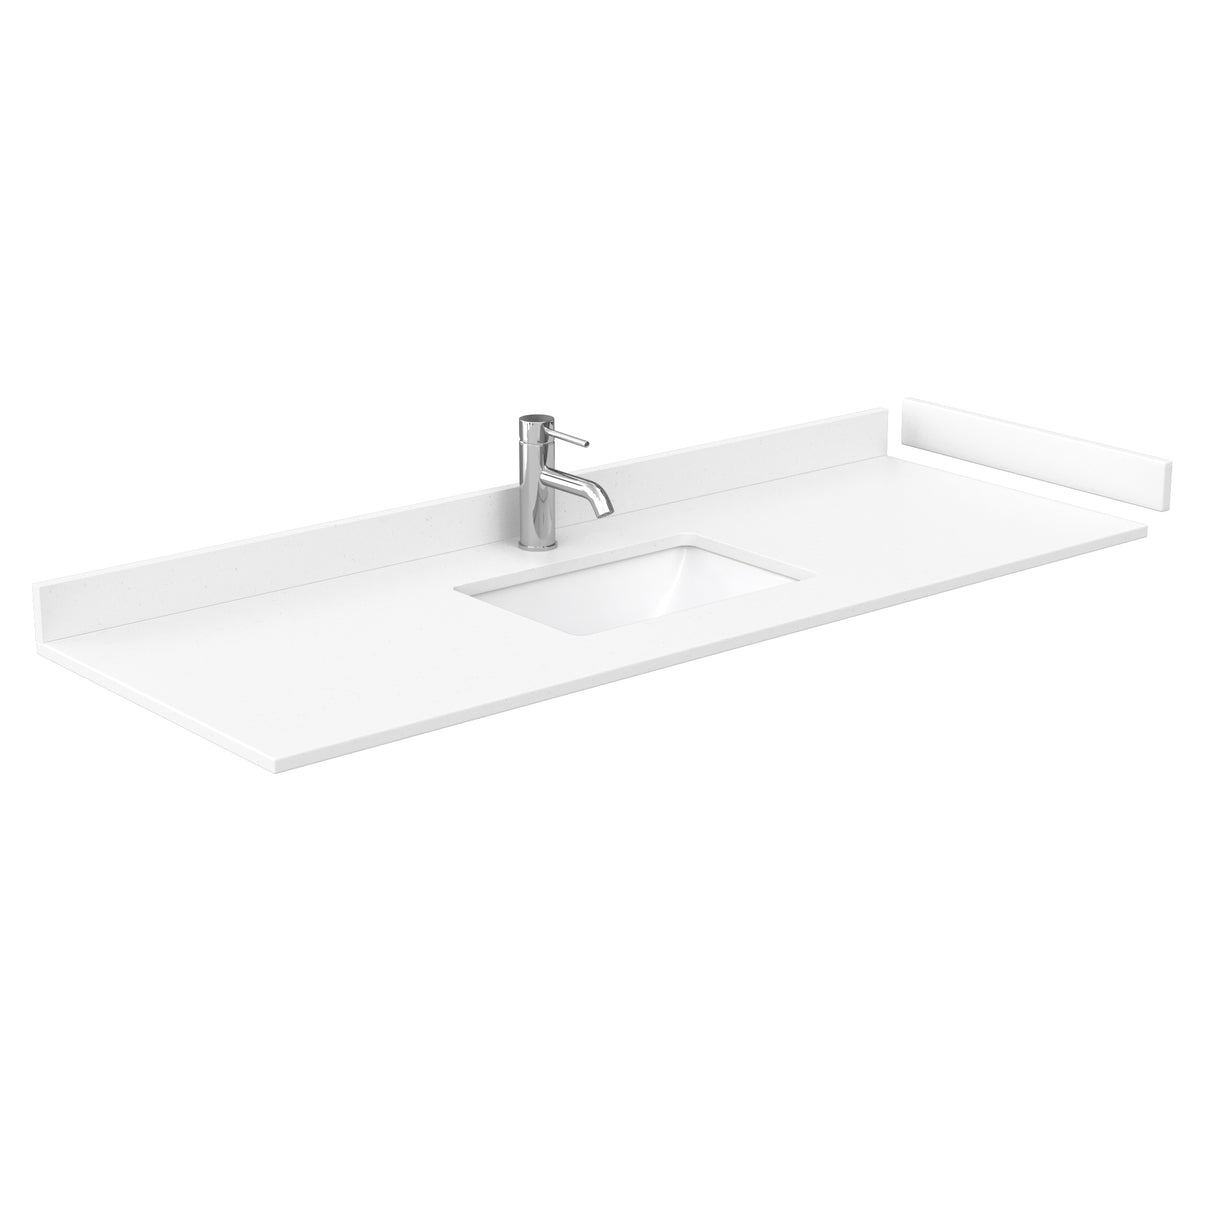 Strada 60 Inch Single Bathroom Vanity in White White Cultured Marble Countertop Undermount Square Sink Brushed Nickel Trim